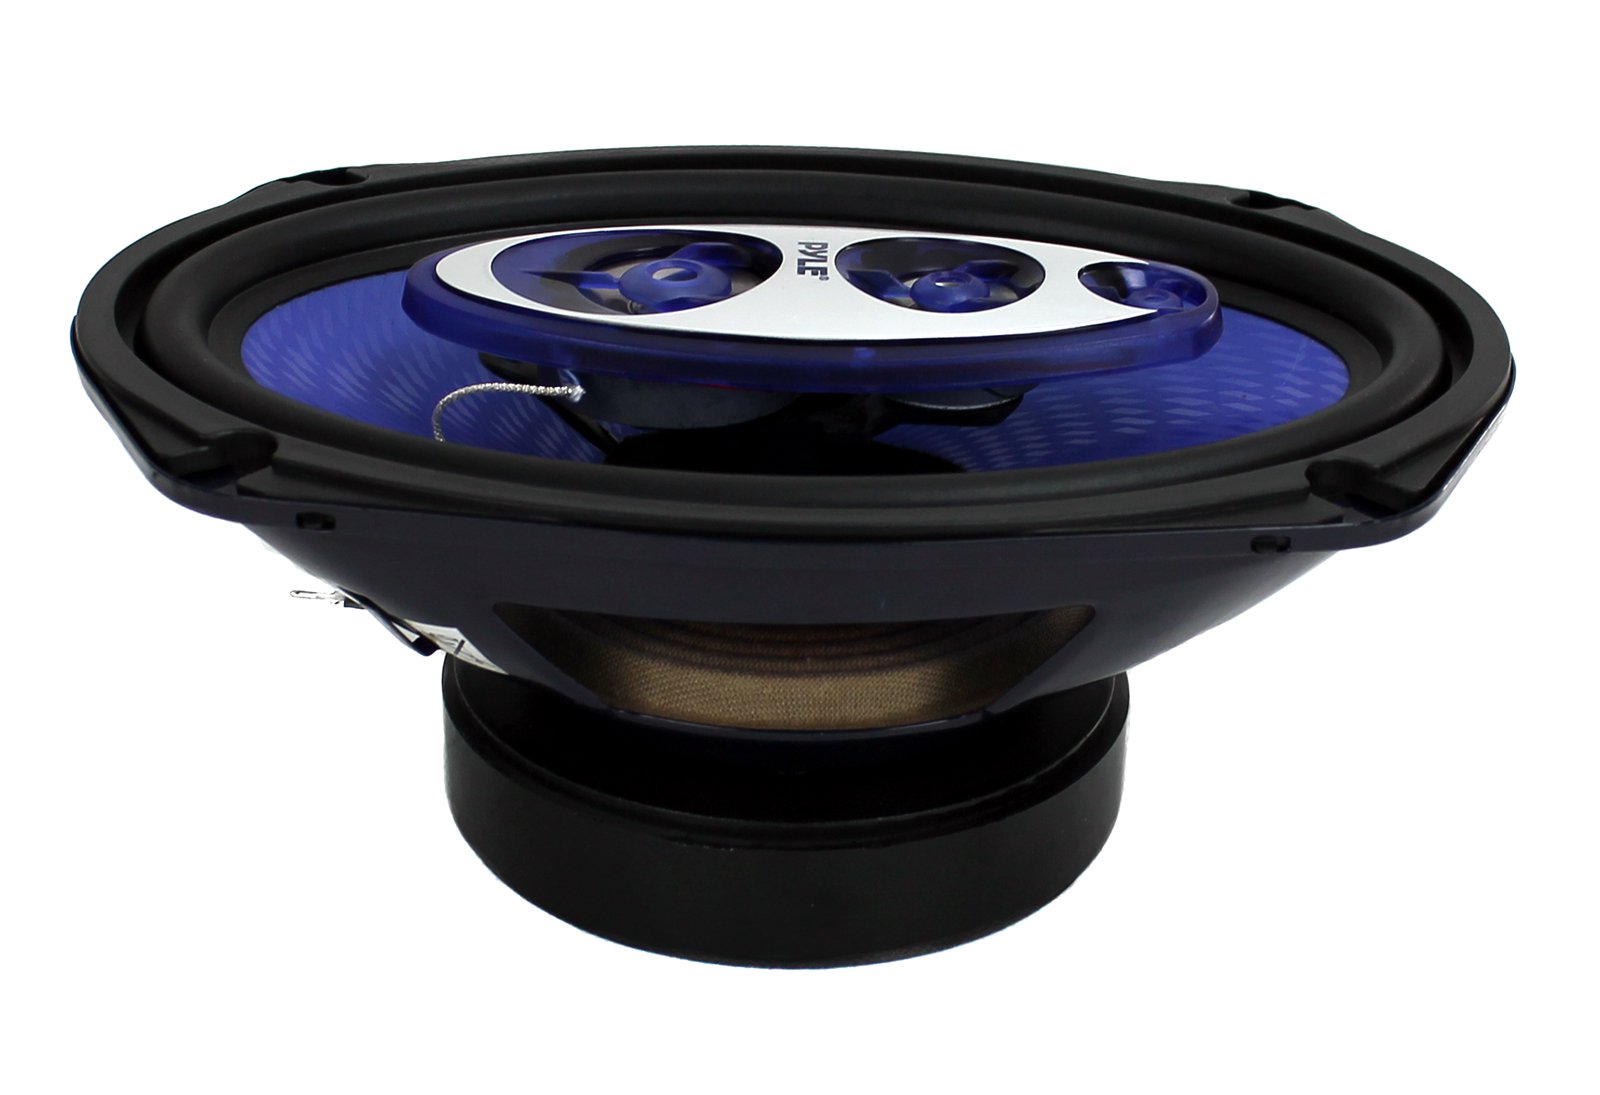 Pyle PL6984BL 6x9" 400 Watts 4-Way Car Coaxial Speakers Audio Stereo Blue - image 4 of 7